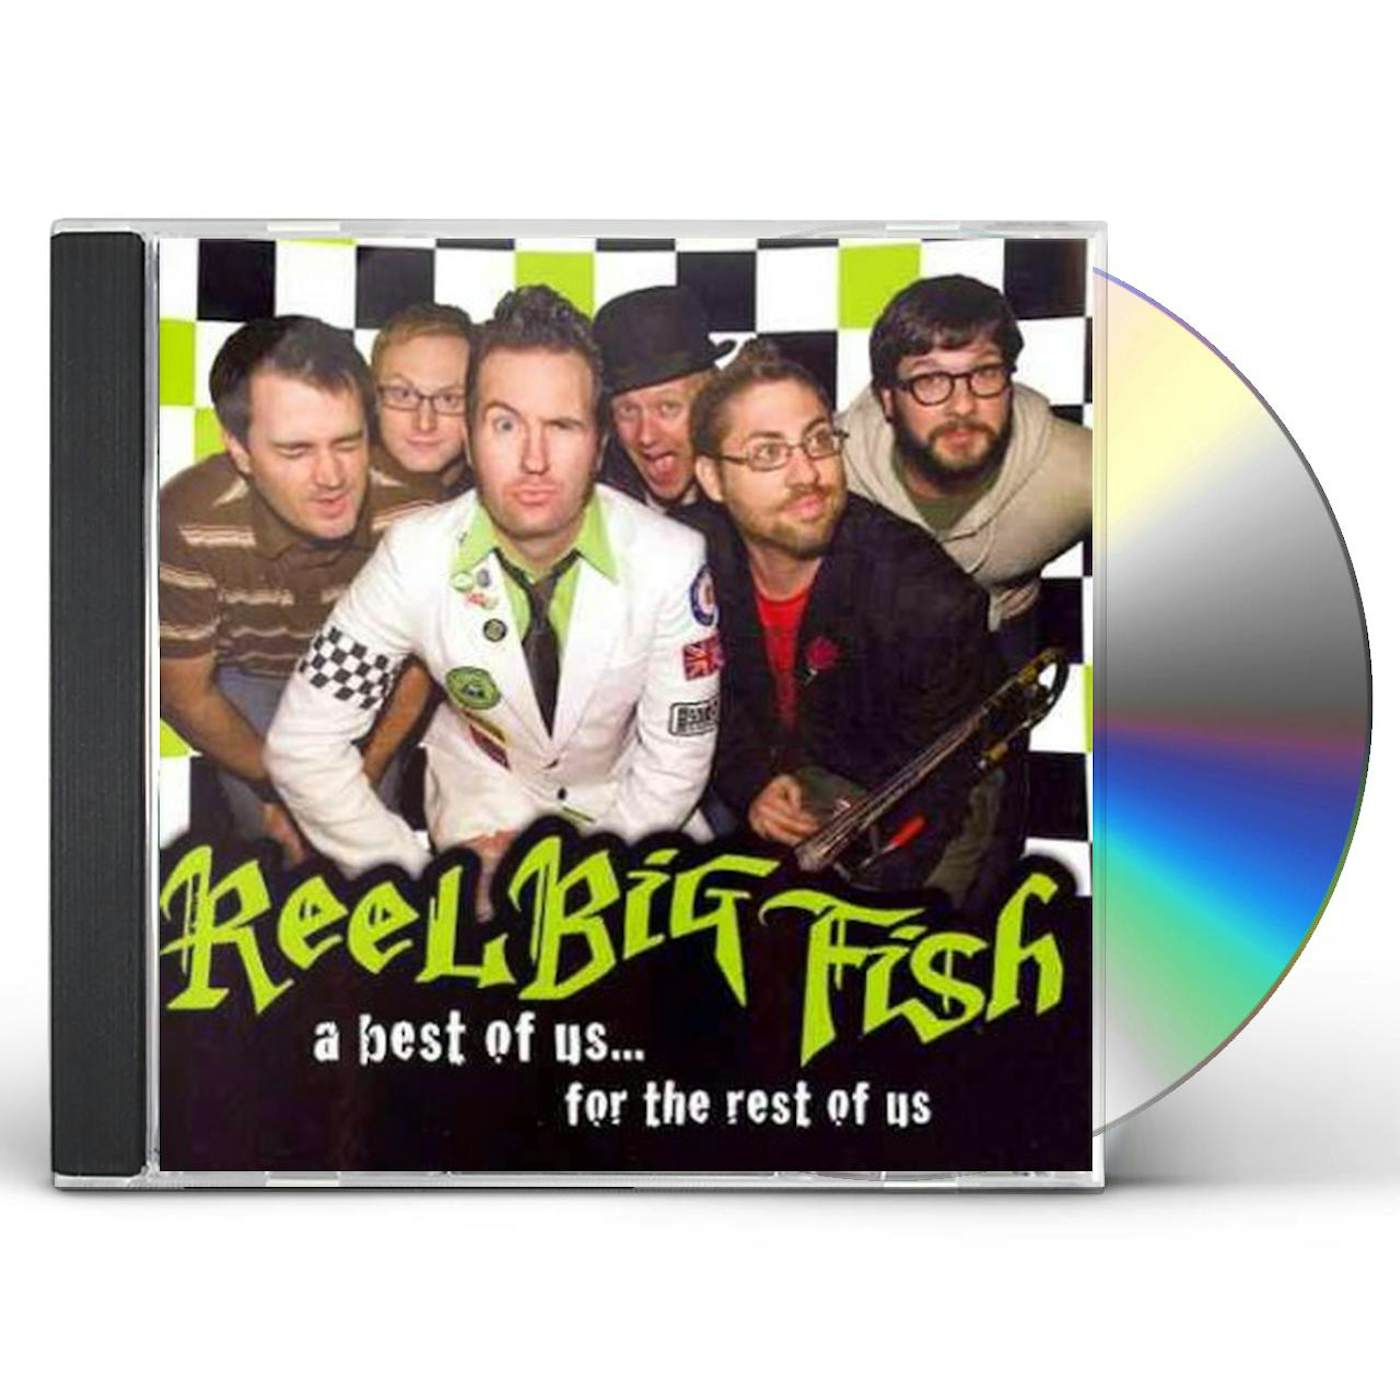 Reel Big Fish OUR LIVE ALBUM IS BETTER THAN YOUR LIVE ALBUM CD